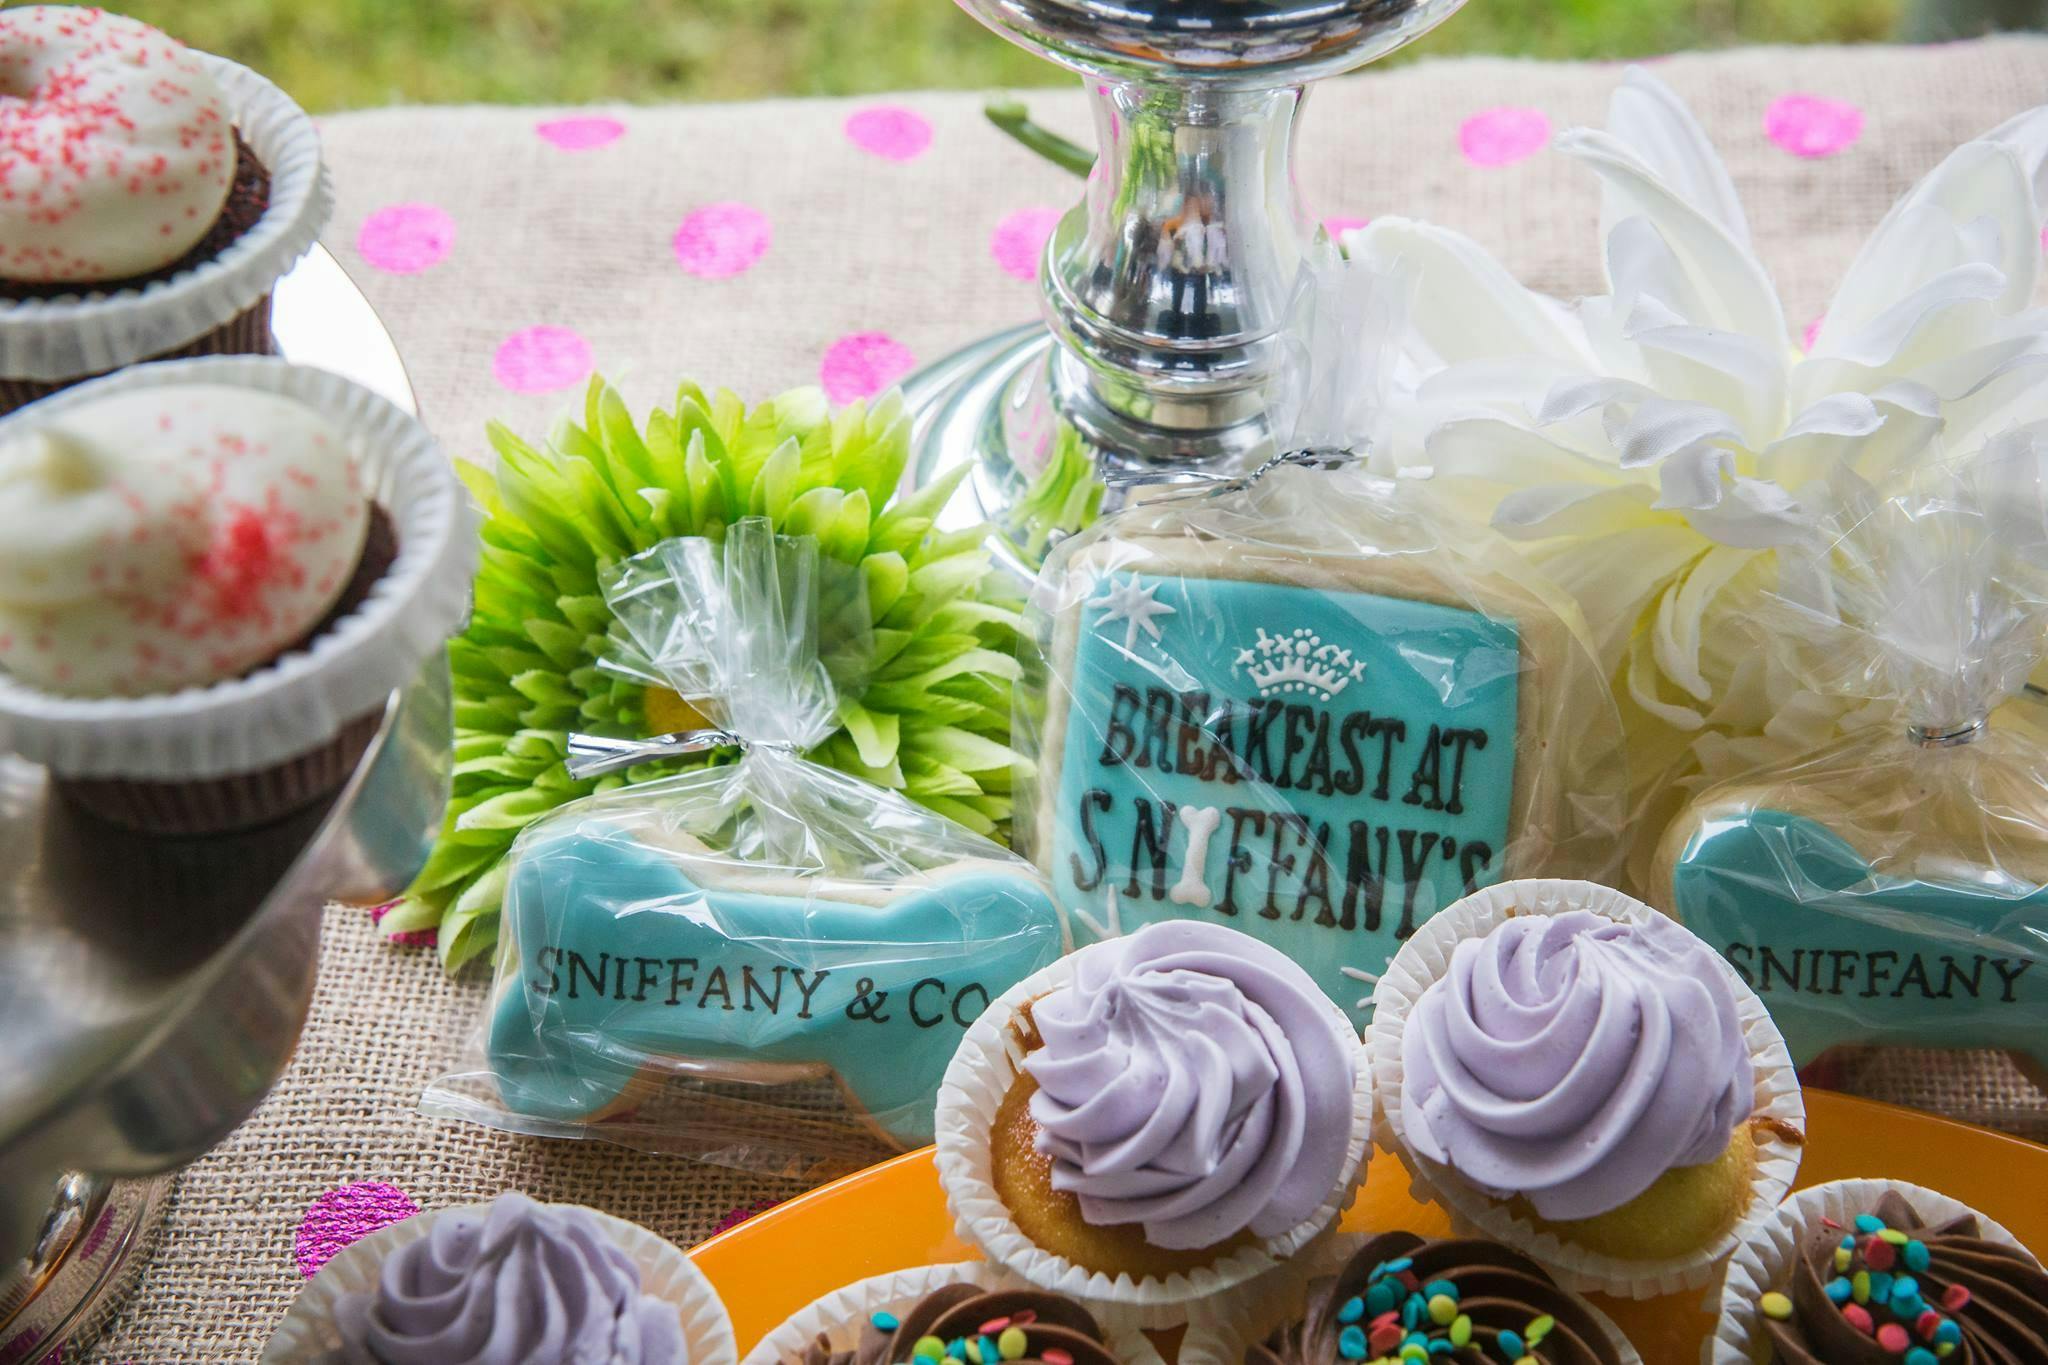 7th Annual Breakfast at Sniffany's Brunch & Benefit Auction